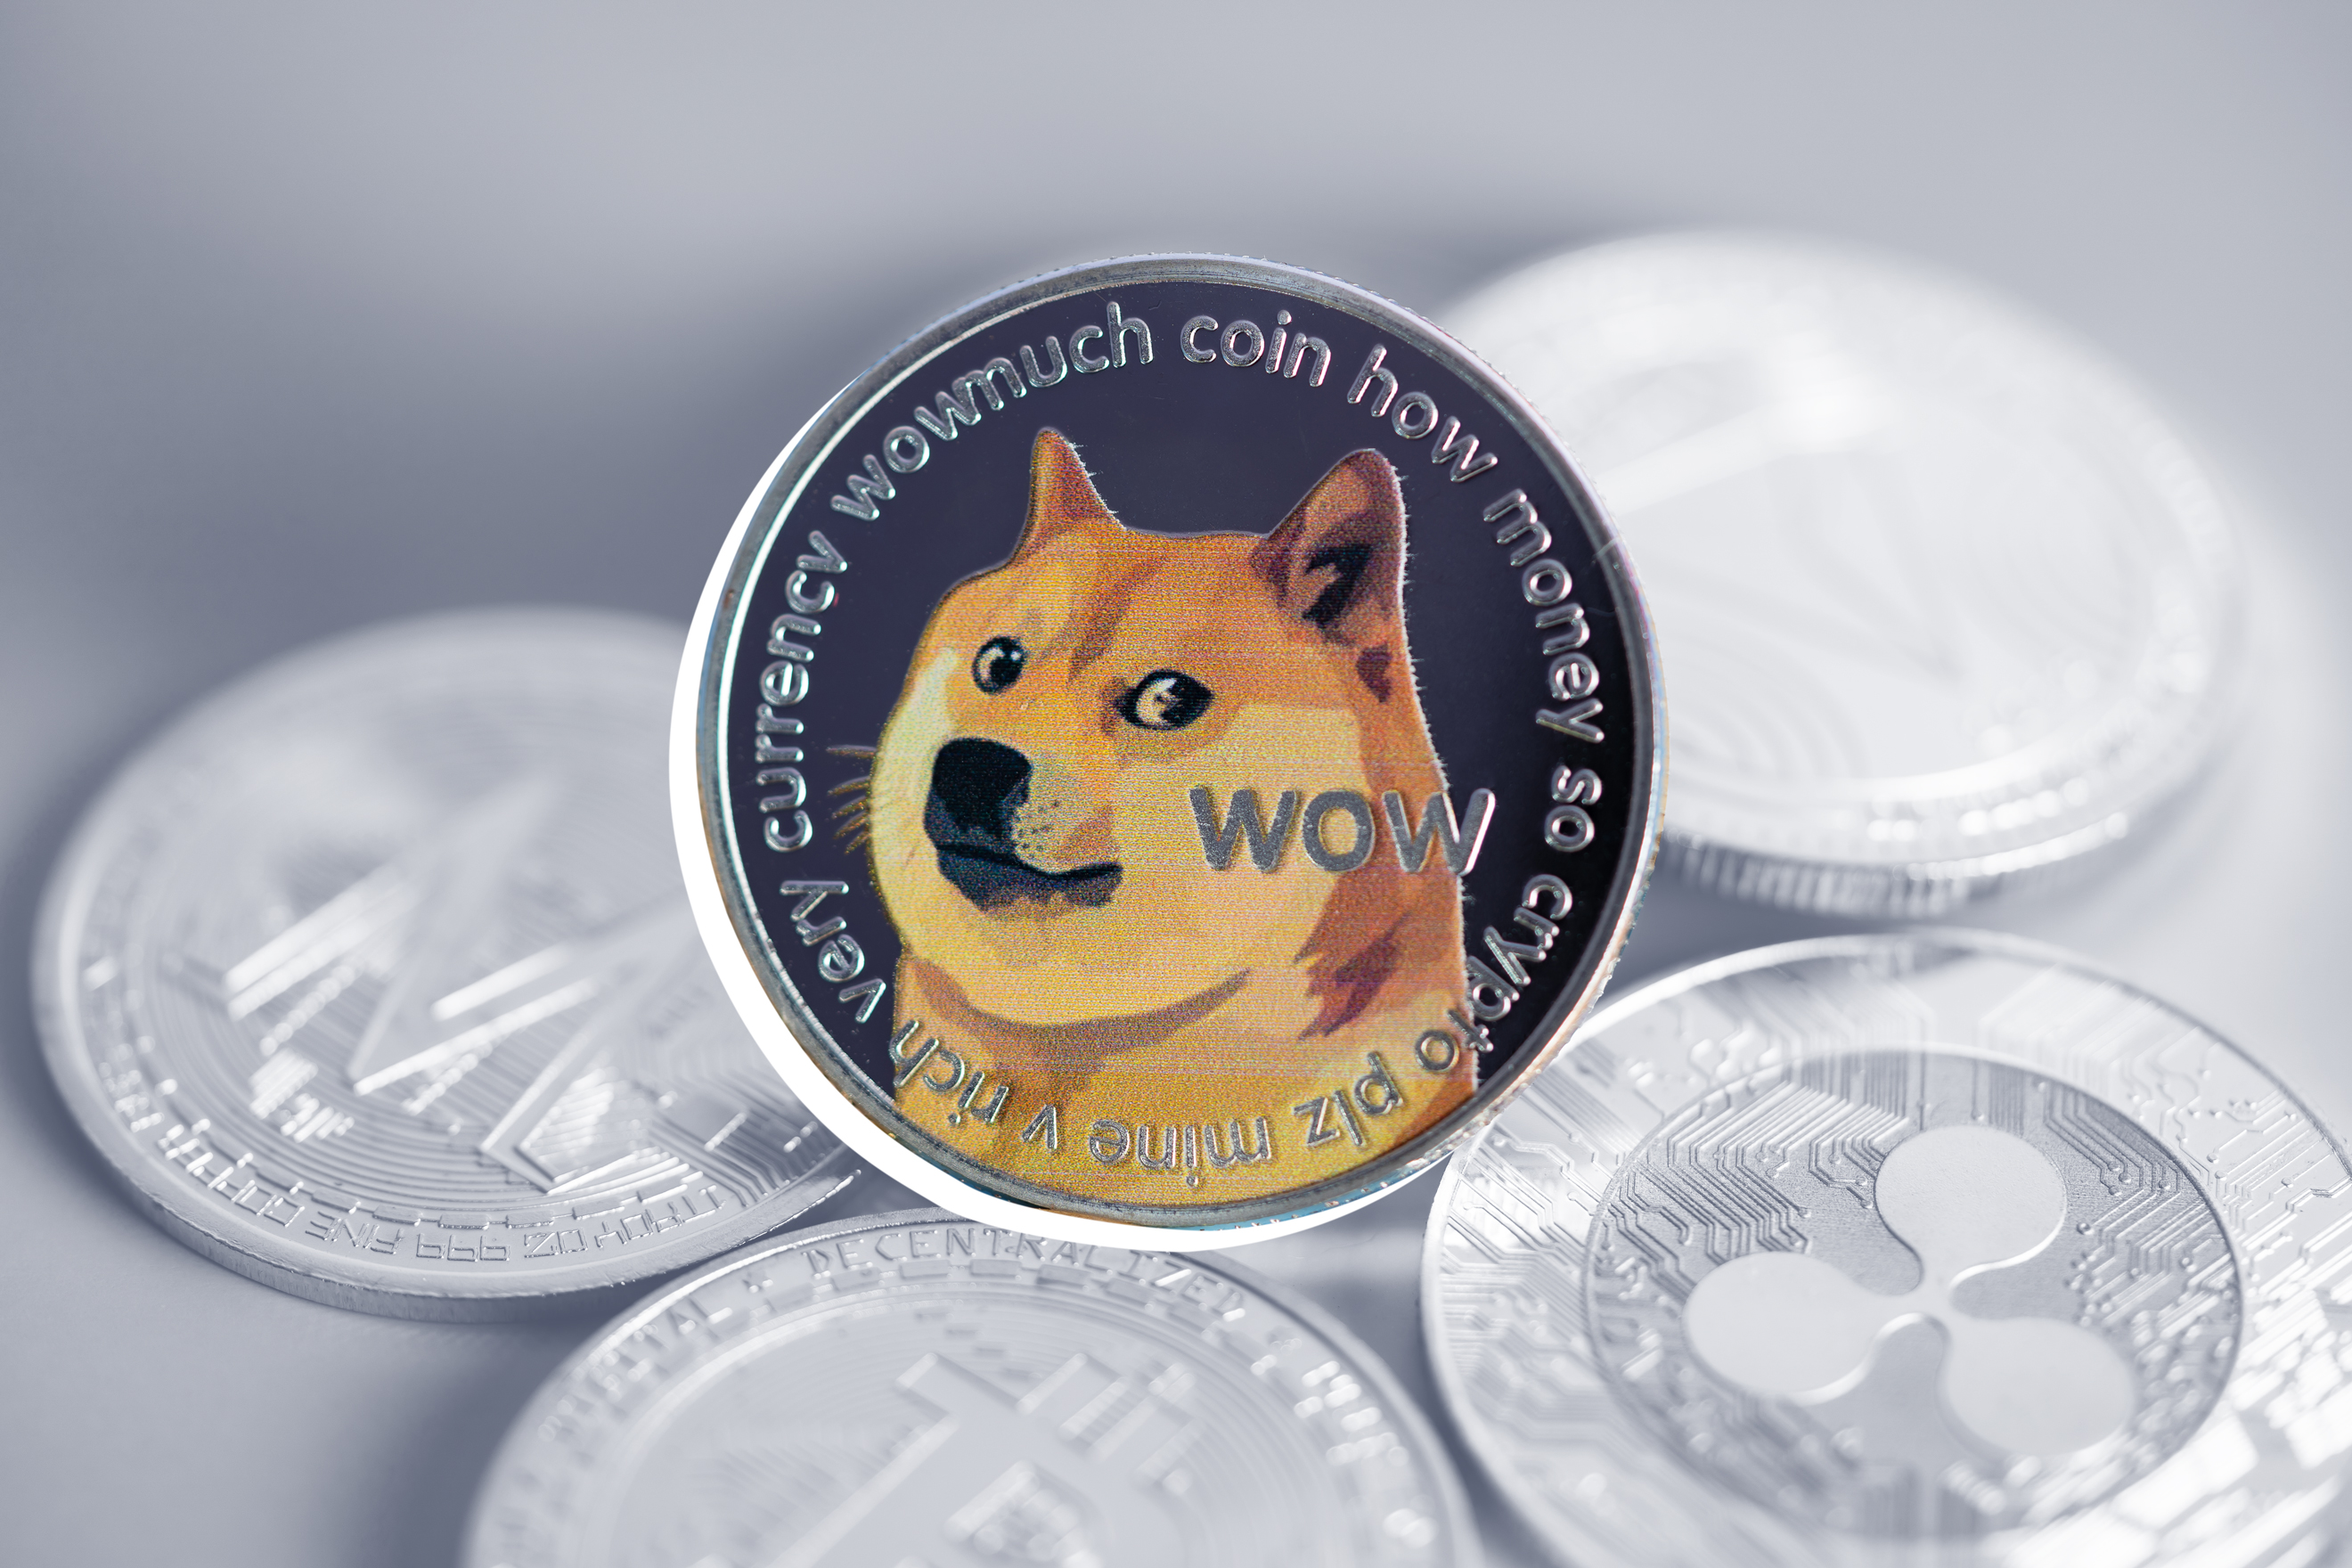 How To Buy Dogecoin On Coinbase? Everything You Need To Know | IBTimes